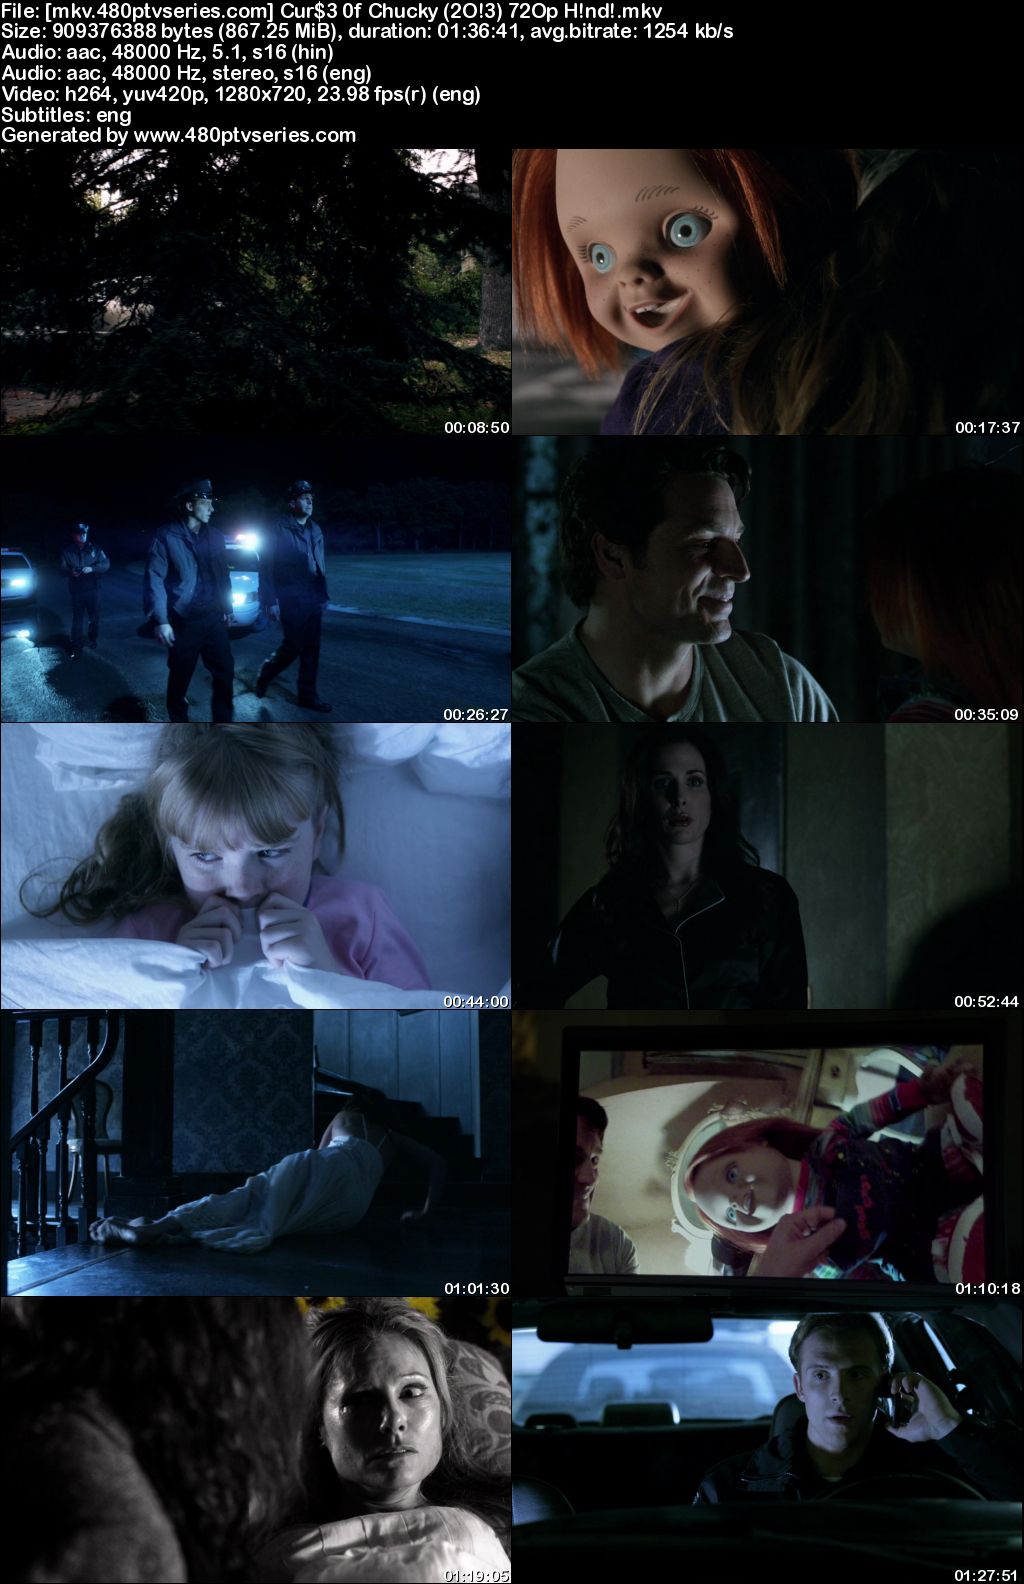 Watch Online Free Curse of Chucky (2013) Full Hindi Dual Audio Movie Download 480p 720p Bluray